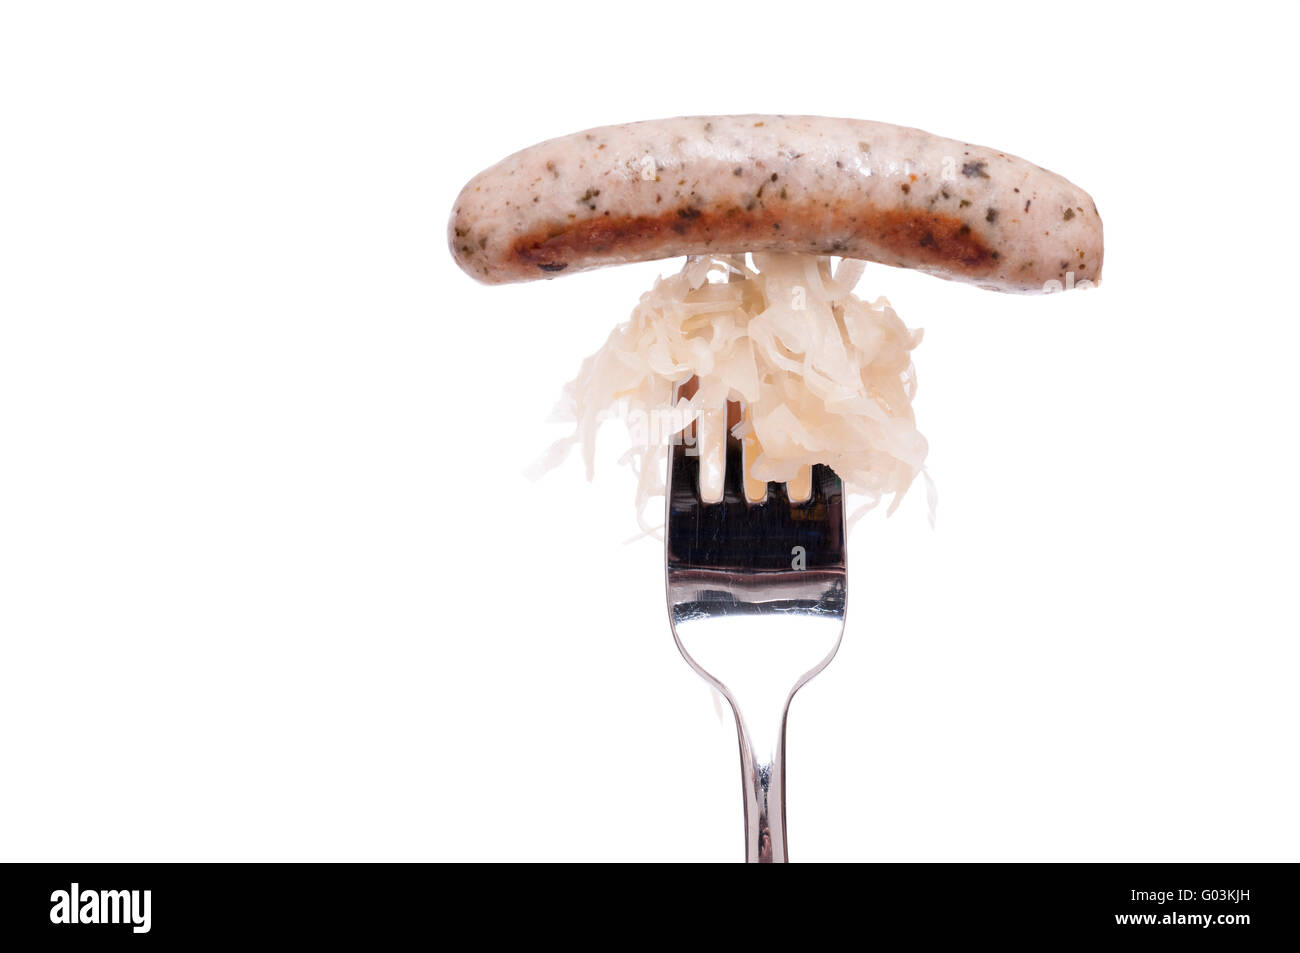 Nuremberger bratwurst with sourcrout on a fork Stock Photo